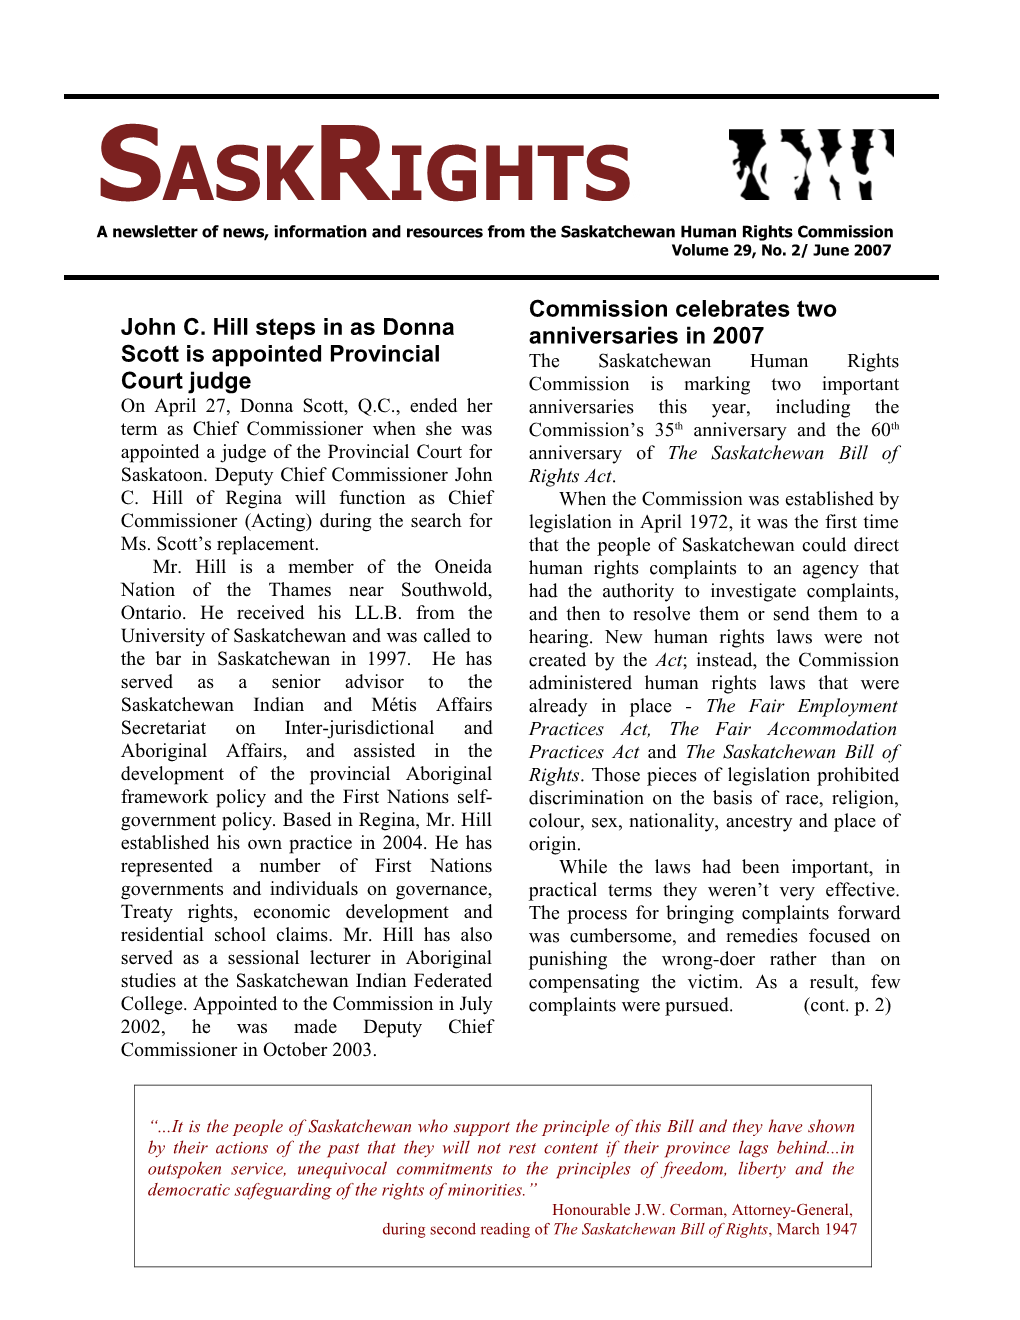 A Newsletter of News, Information and Resources from the Saskatchewan Human Rights Commission